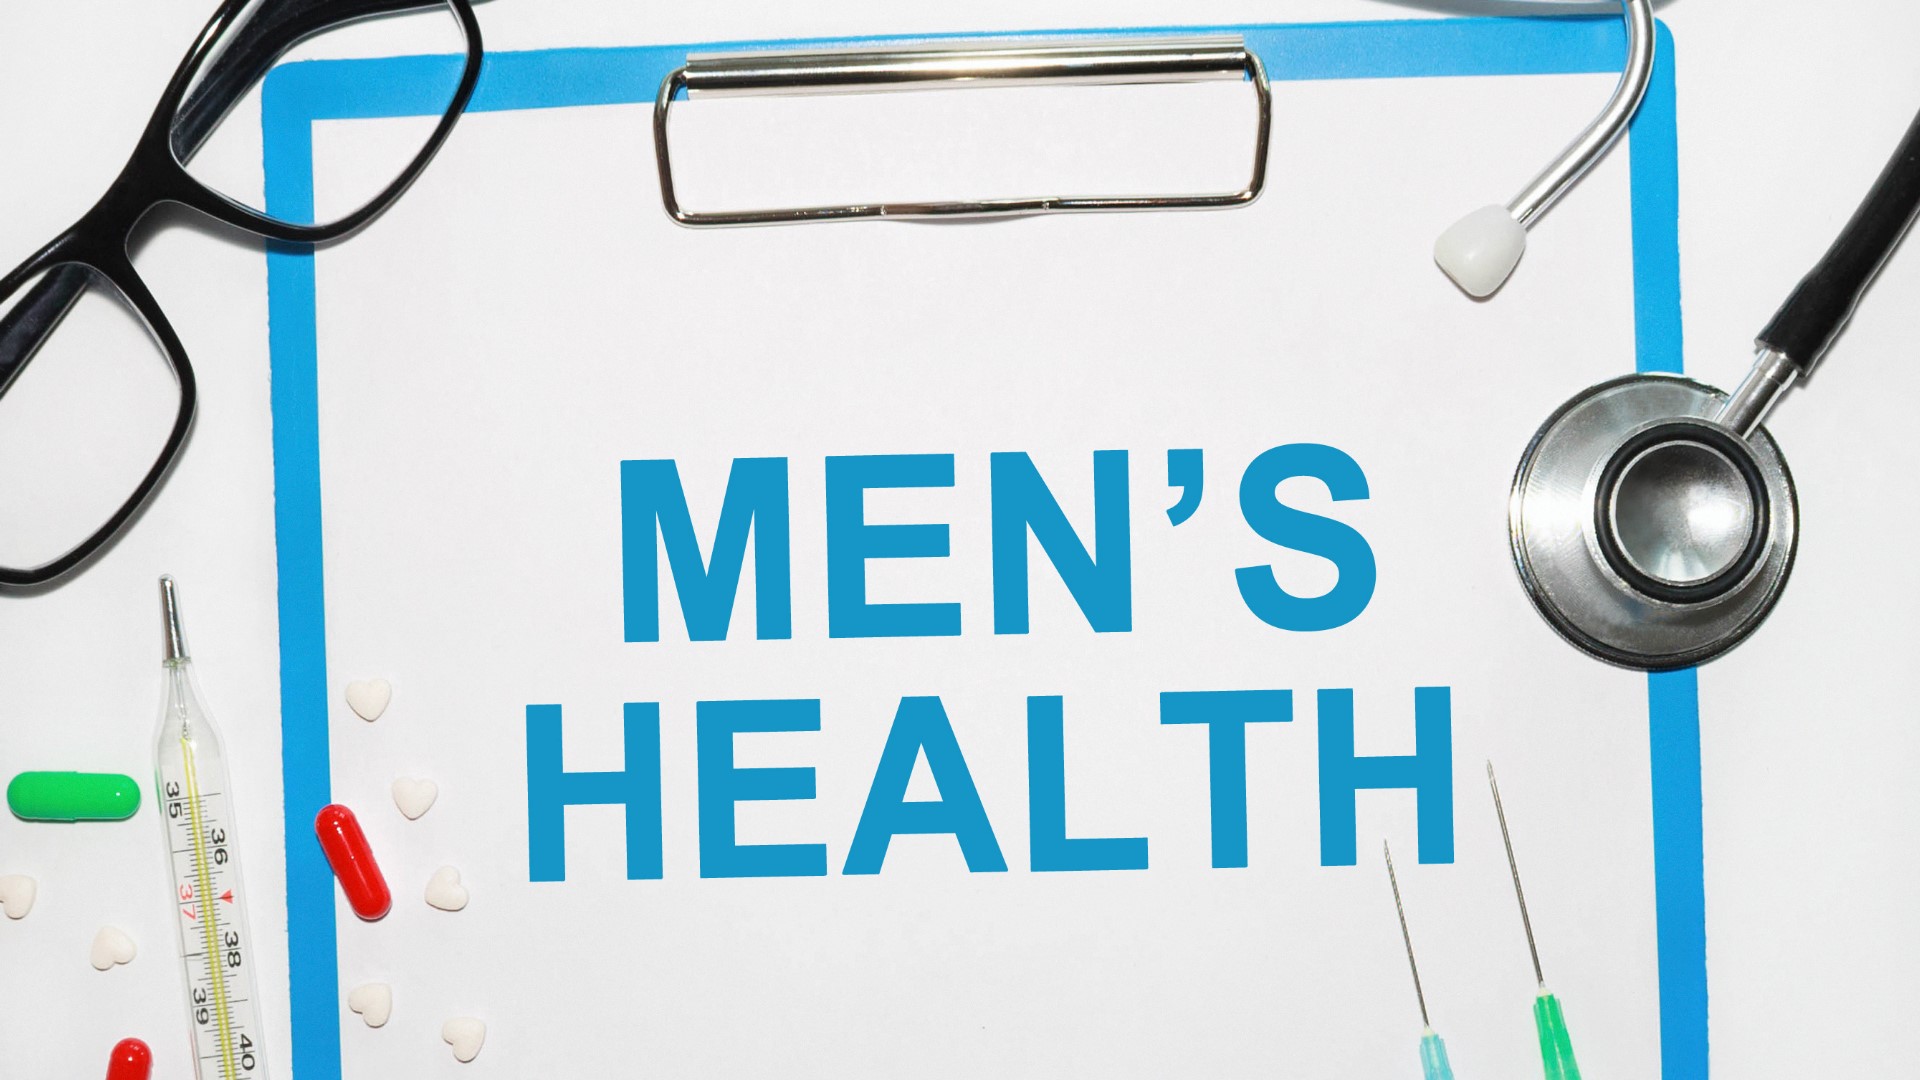 Monday marks the beginning of Men's Health Awareness Month. Women on average live 5 years longer than men. There are some steps men can take to improve their health.